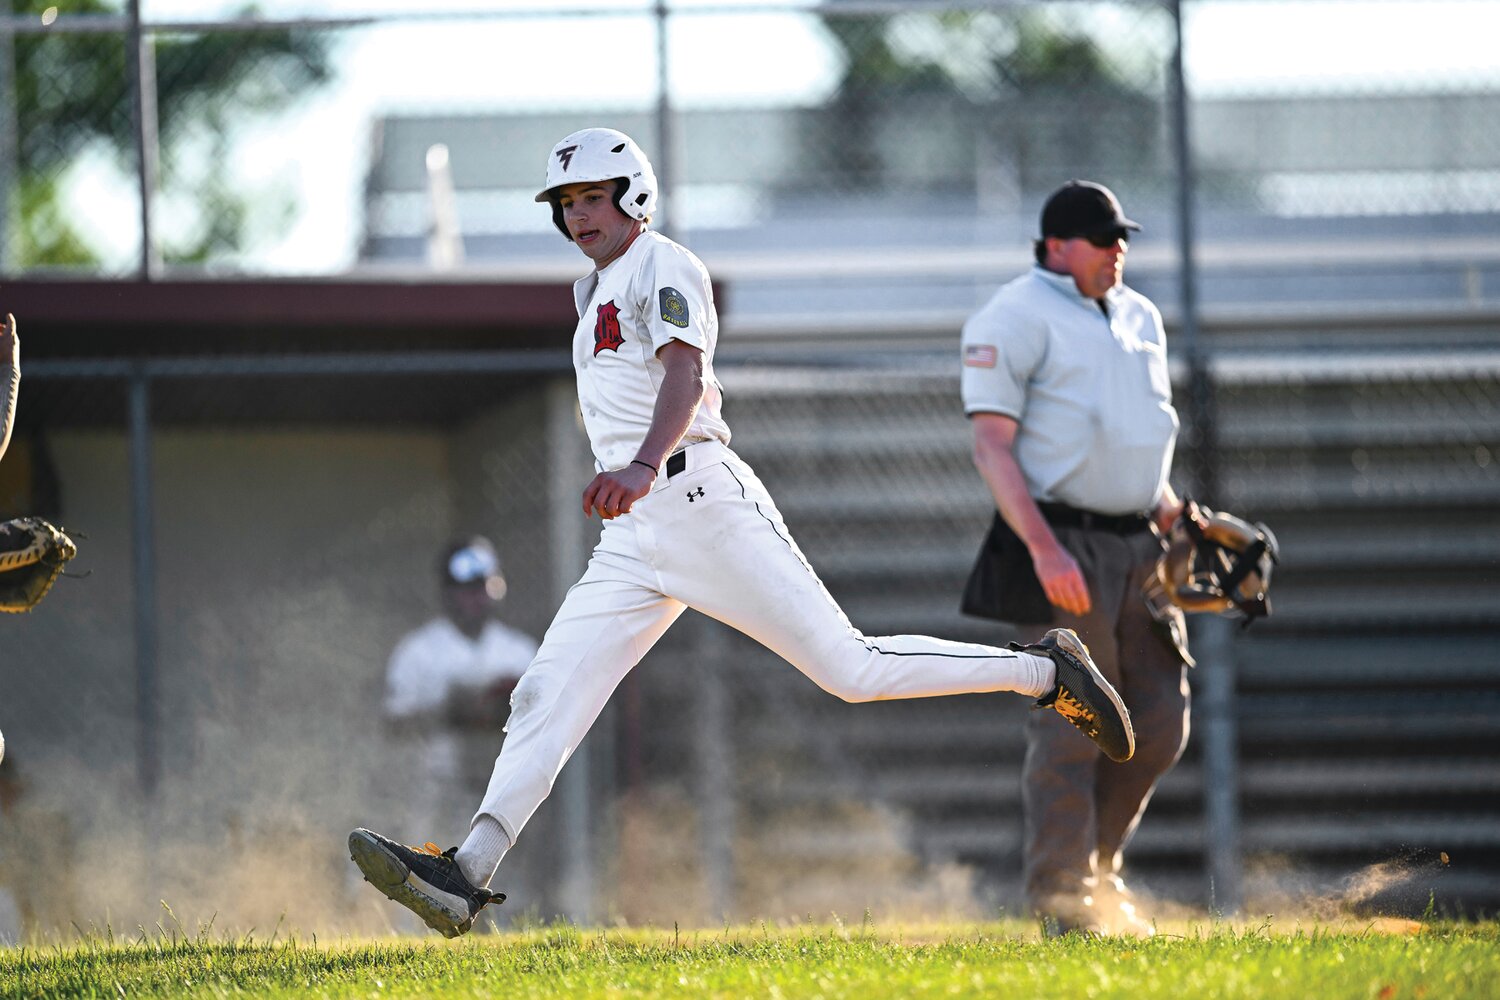 Doylestown’s Connor Grzywacz scores in the second inning, extending the lead to 8-0.